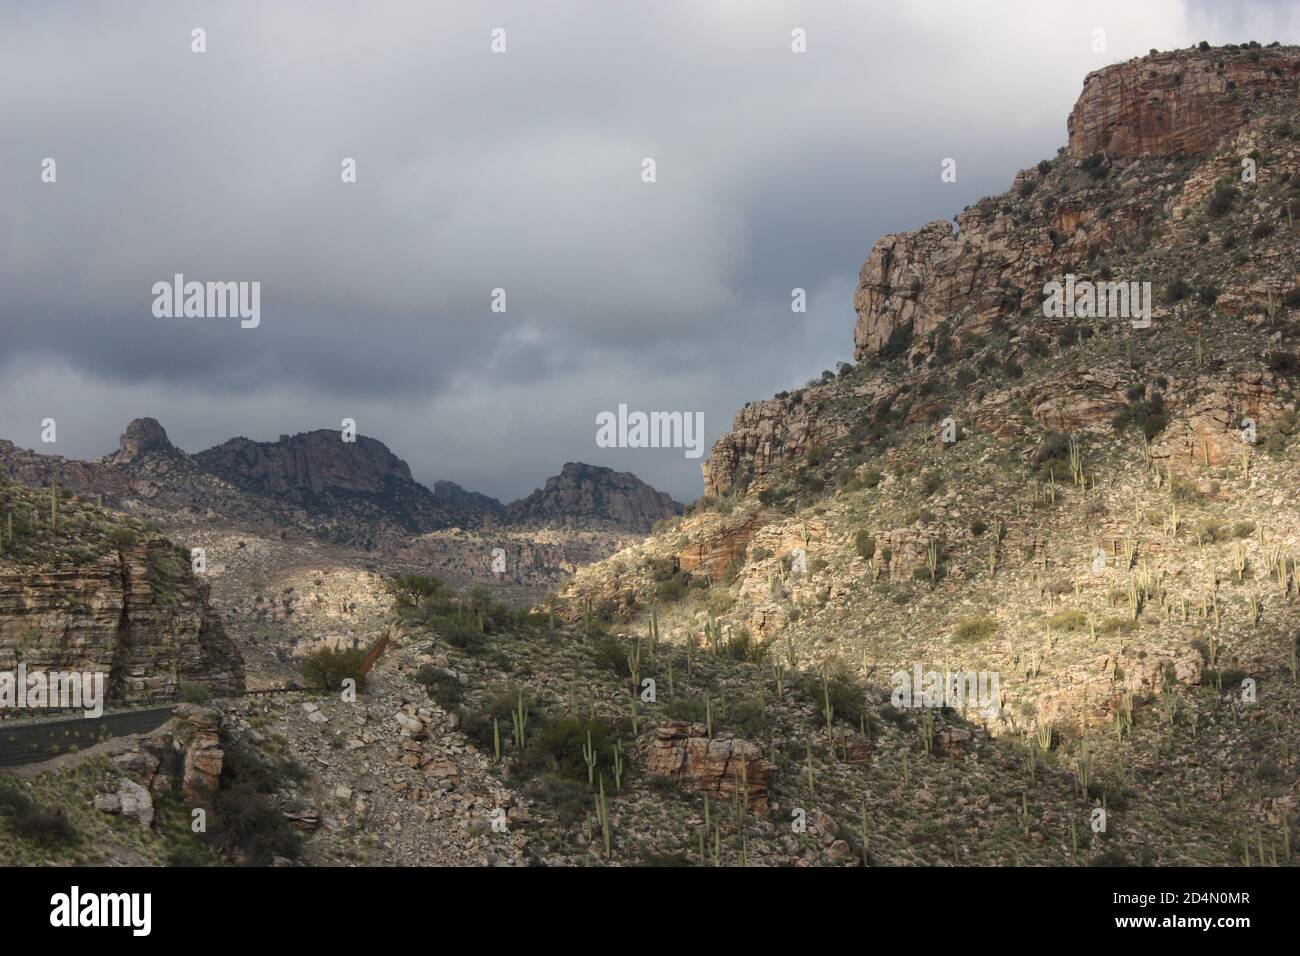 Sonoran Desert mountain slopes blanketed with Saquaro cactus under a dramatically lit sky Stock Photo